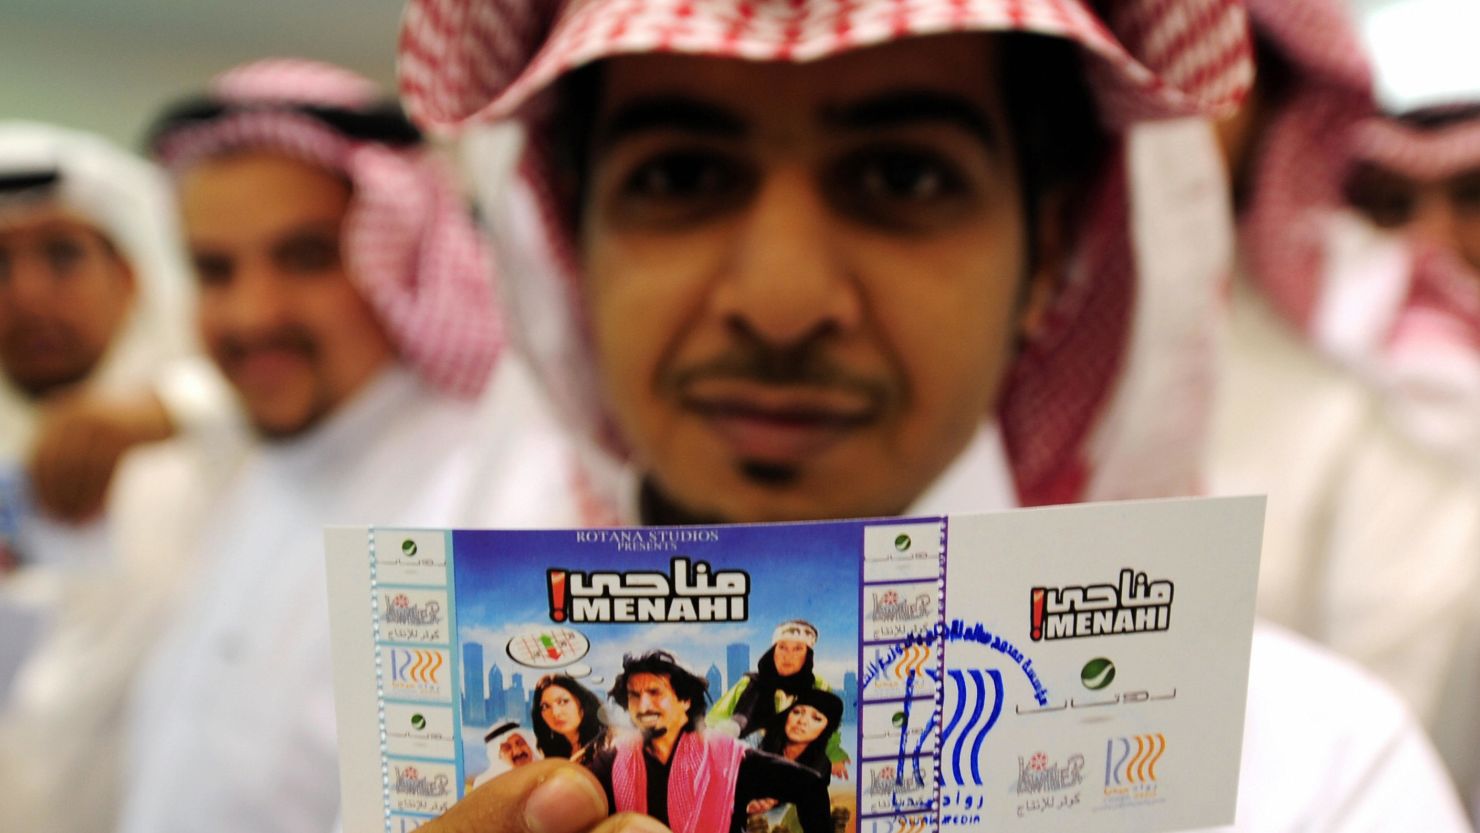 In 2008, a rare screening of the Saudi comedy film "Manahi" in Jeddah raised hopes -- that were eventually dashed -- that a then three-decade ban on cinema in the kingdom could be lifted.  
